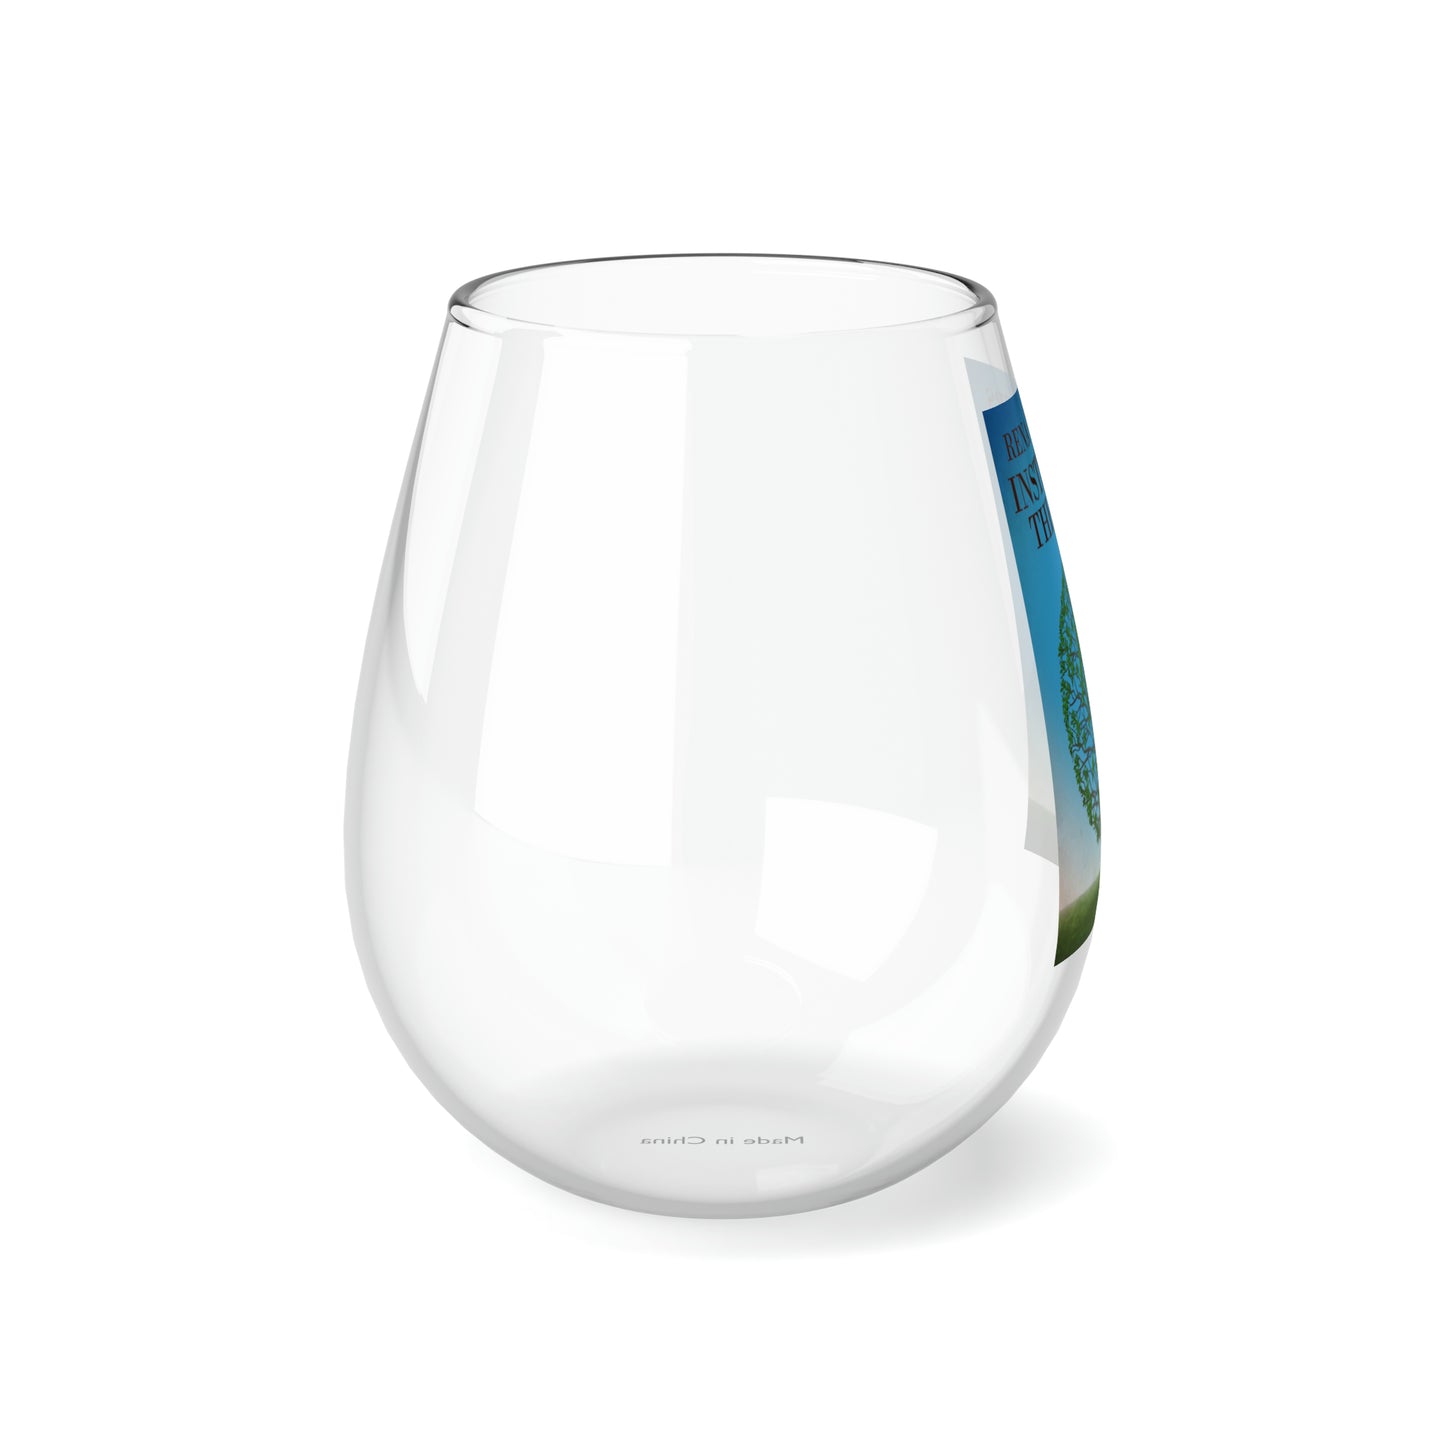 Instead Of Therapy - Stemless Wine Glass, 11.75oz